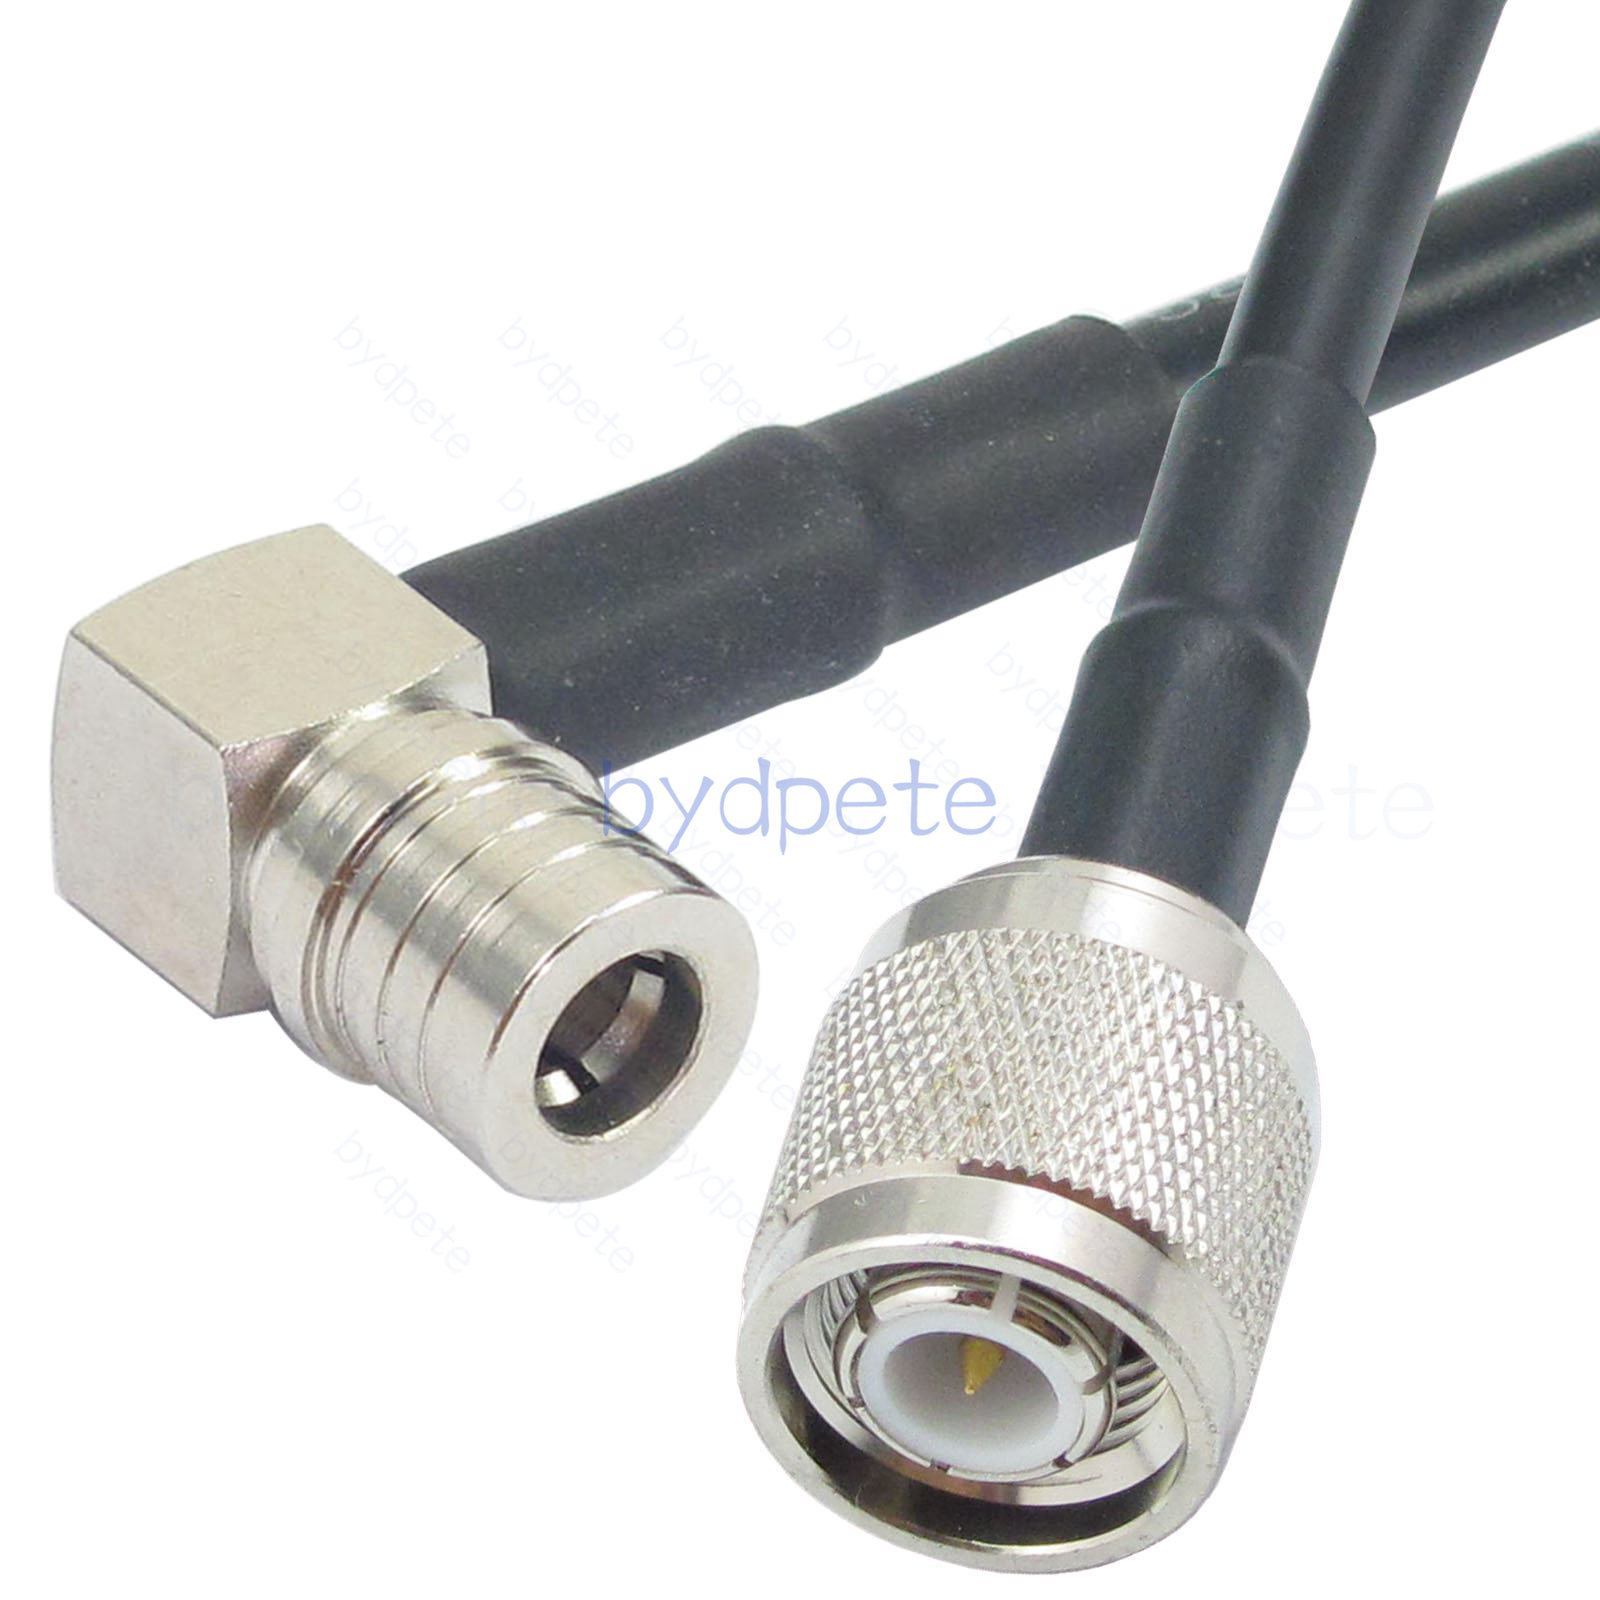 TNC Male to QMA Male right angle 90degree Plug RG58 RG58U Coaxial Cable Koaxail Kable RF 50 ohms lot bydpete BYDC515QMAMR158